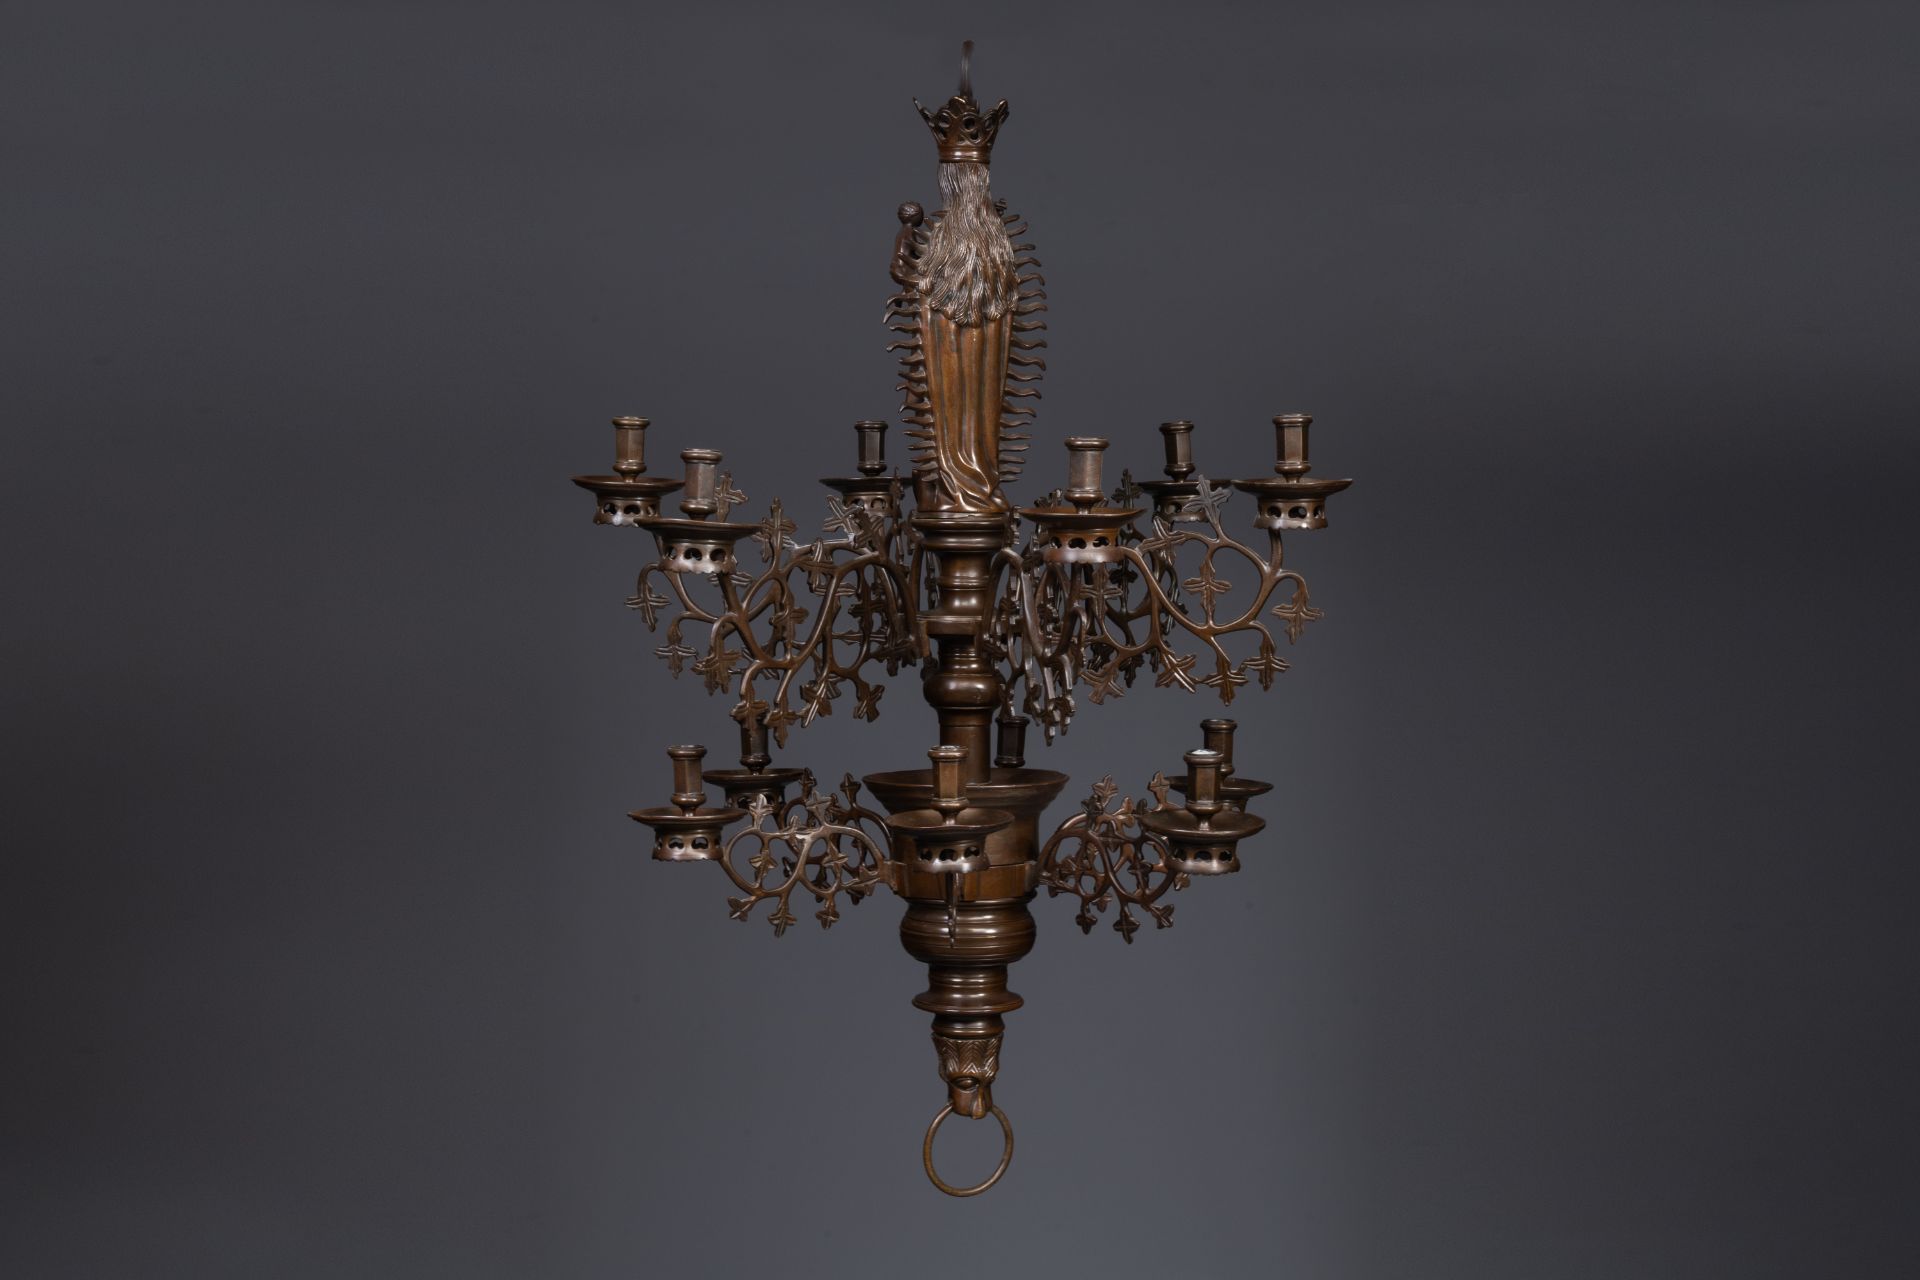 A Flemish or Dutch bronze Gothic Revival large bronze 'Madonna and Child' chandelier, 19th C. - Image 2 of 8